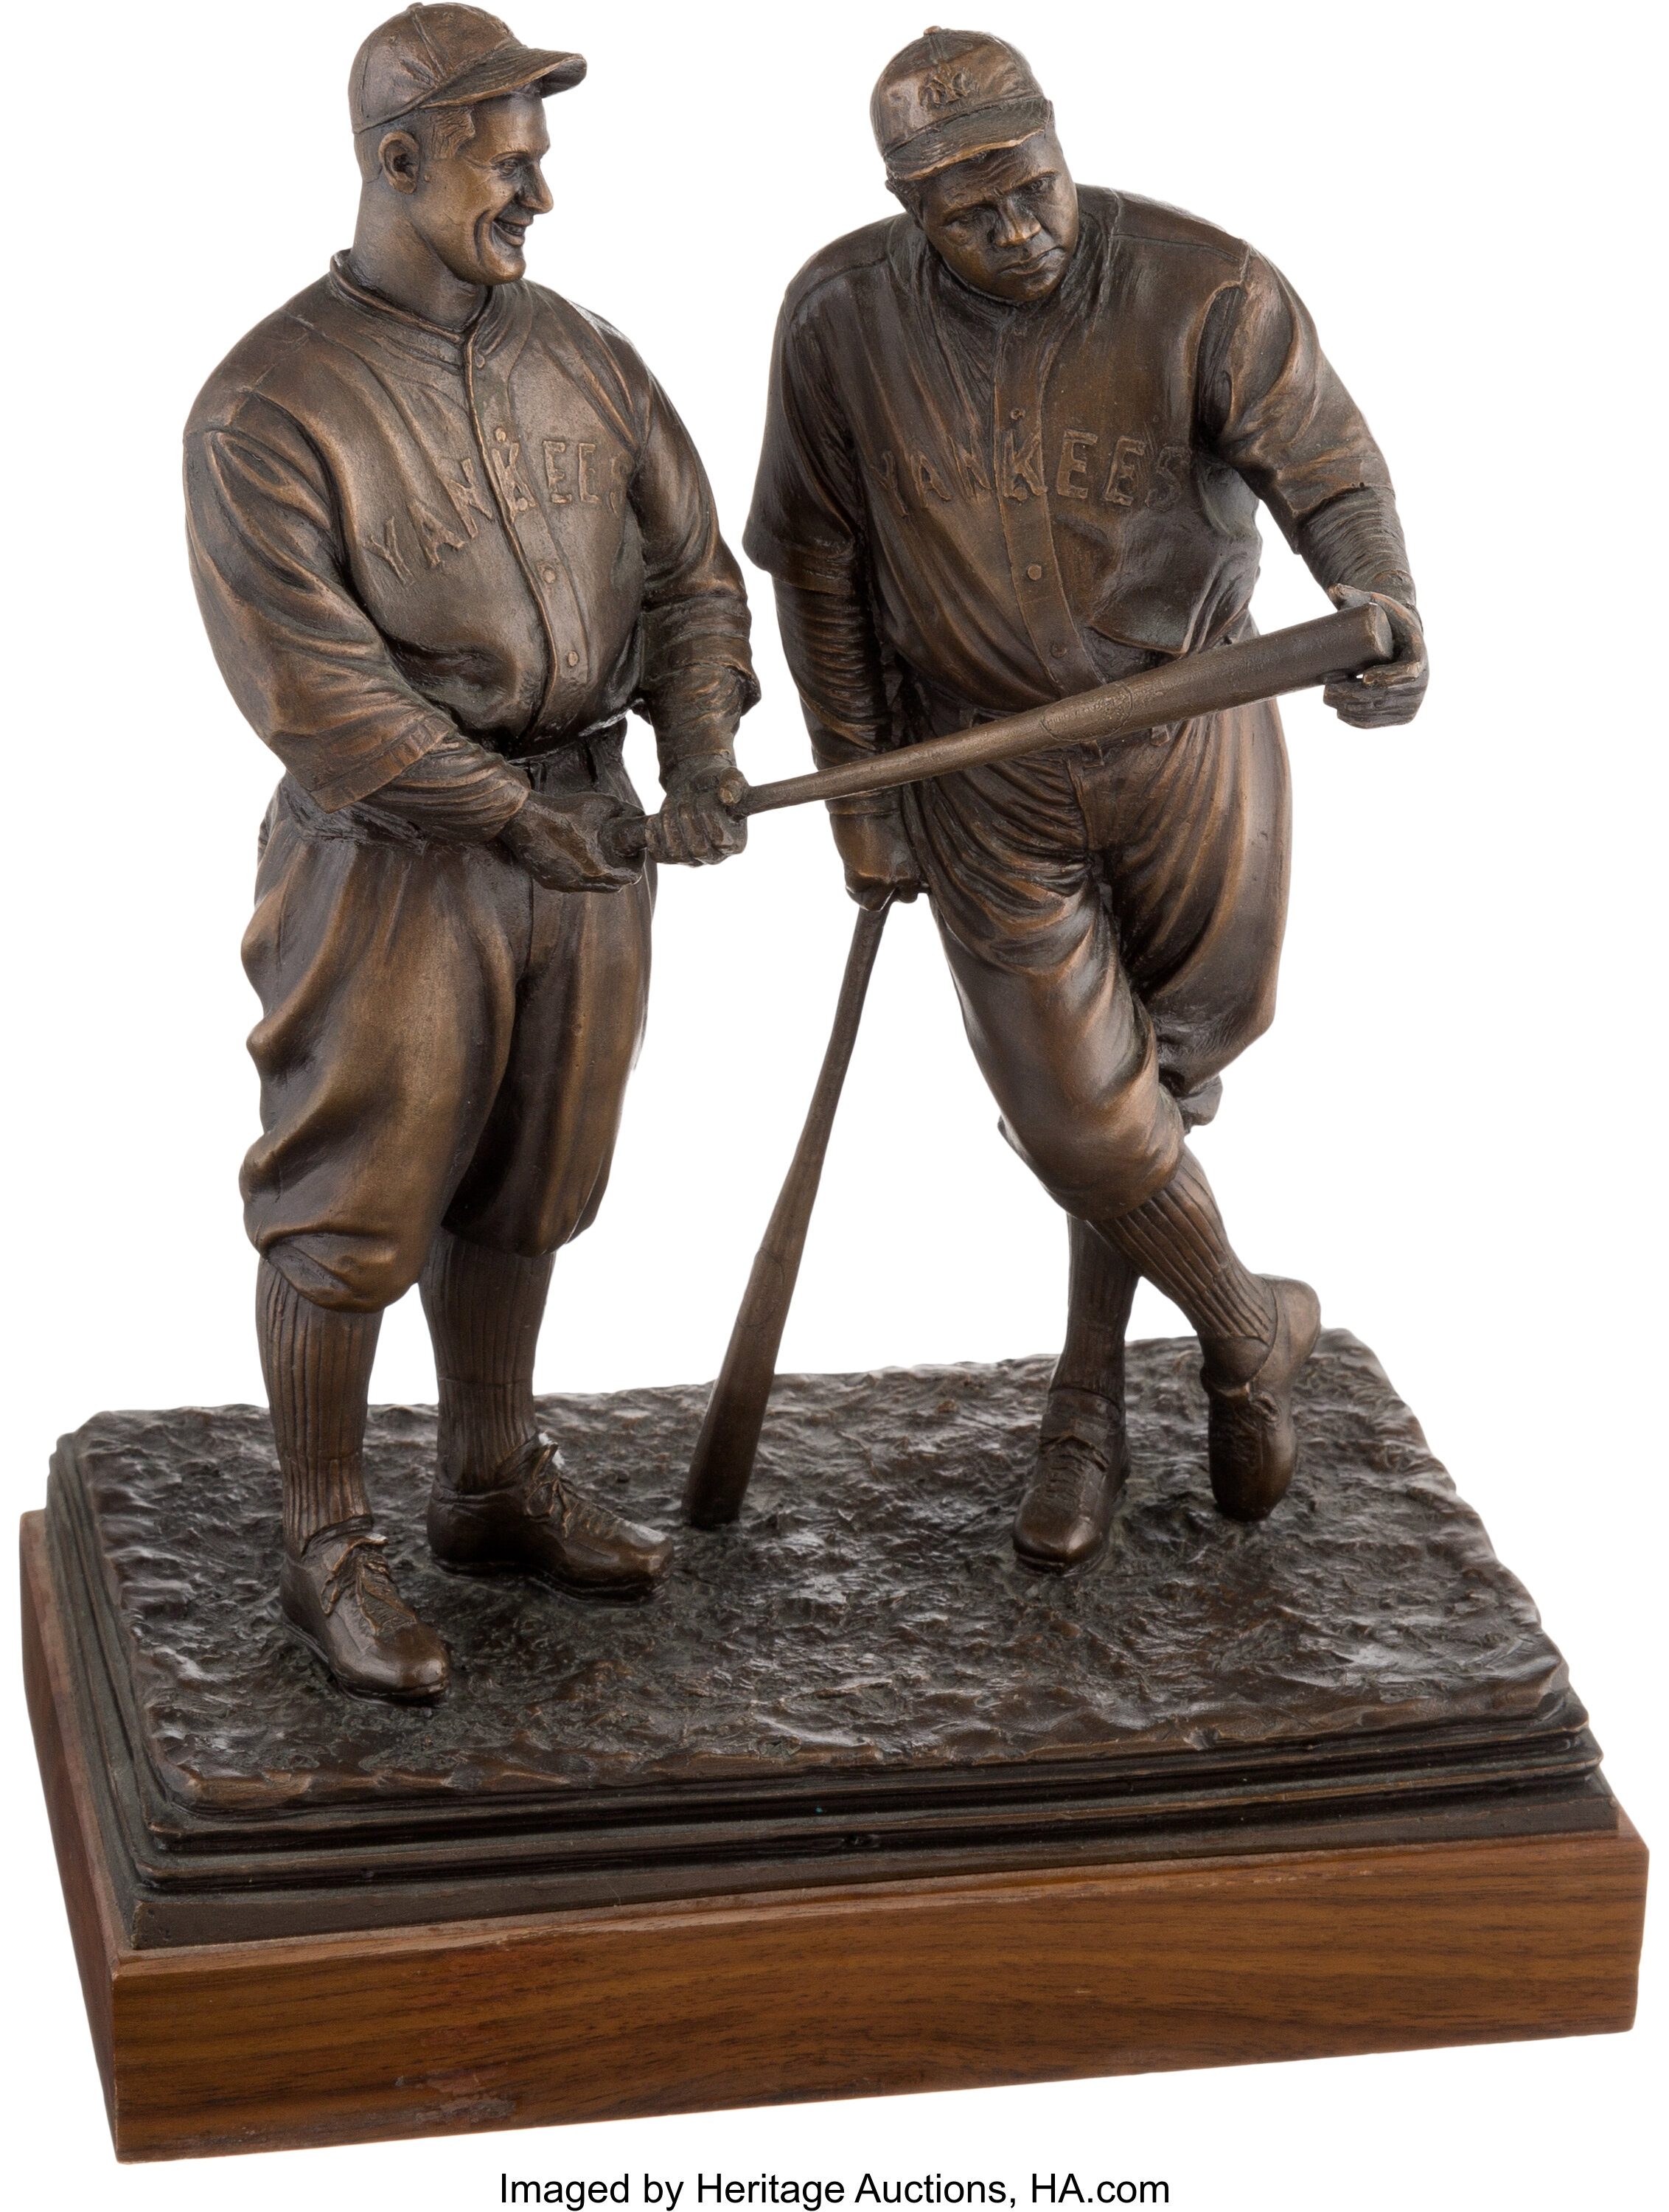 1999 Babe Ruth & Lou Gehrig Bronze Statue by Palmer Murphy